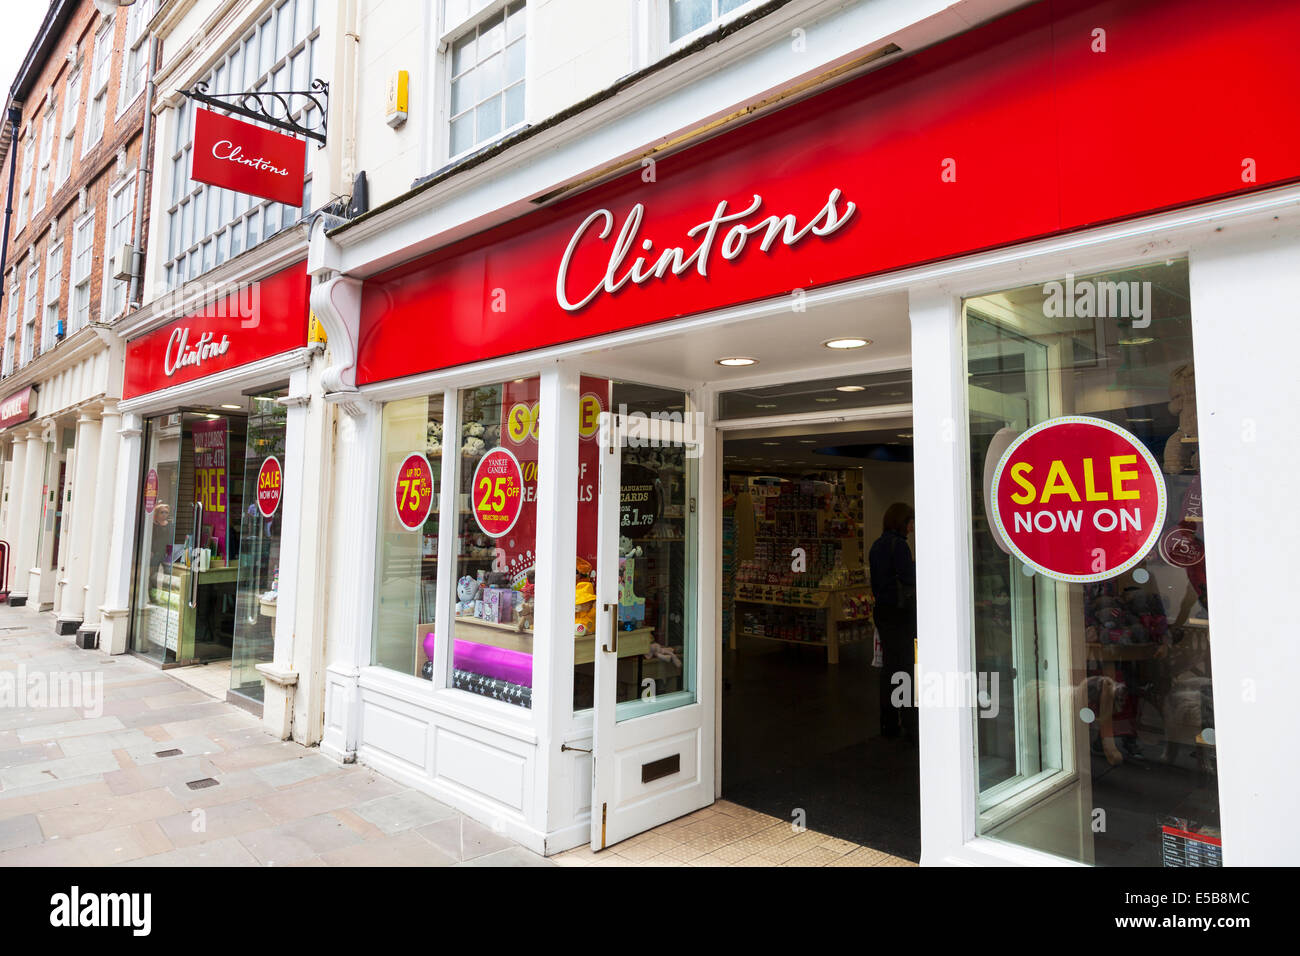 Clintons cards card shop store sign exterior front entrance sale clinton's Worcester  High Street Worcestershire England United Stock Photo